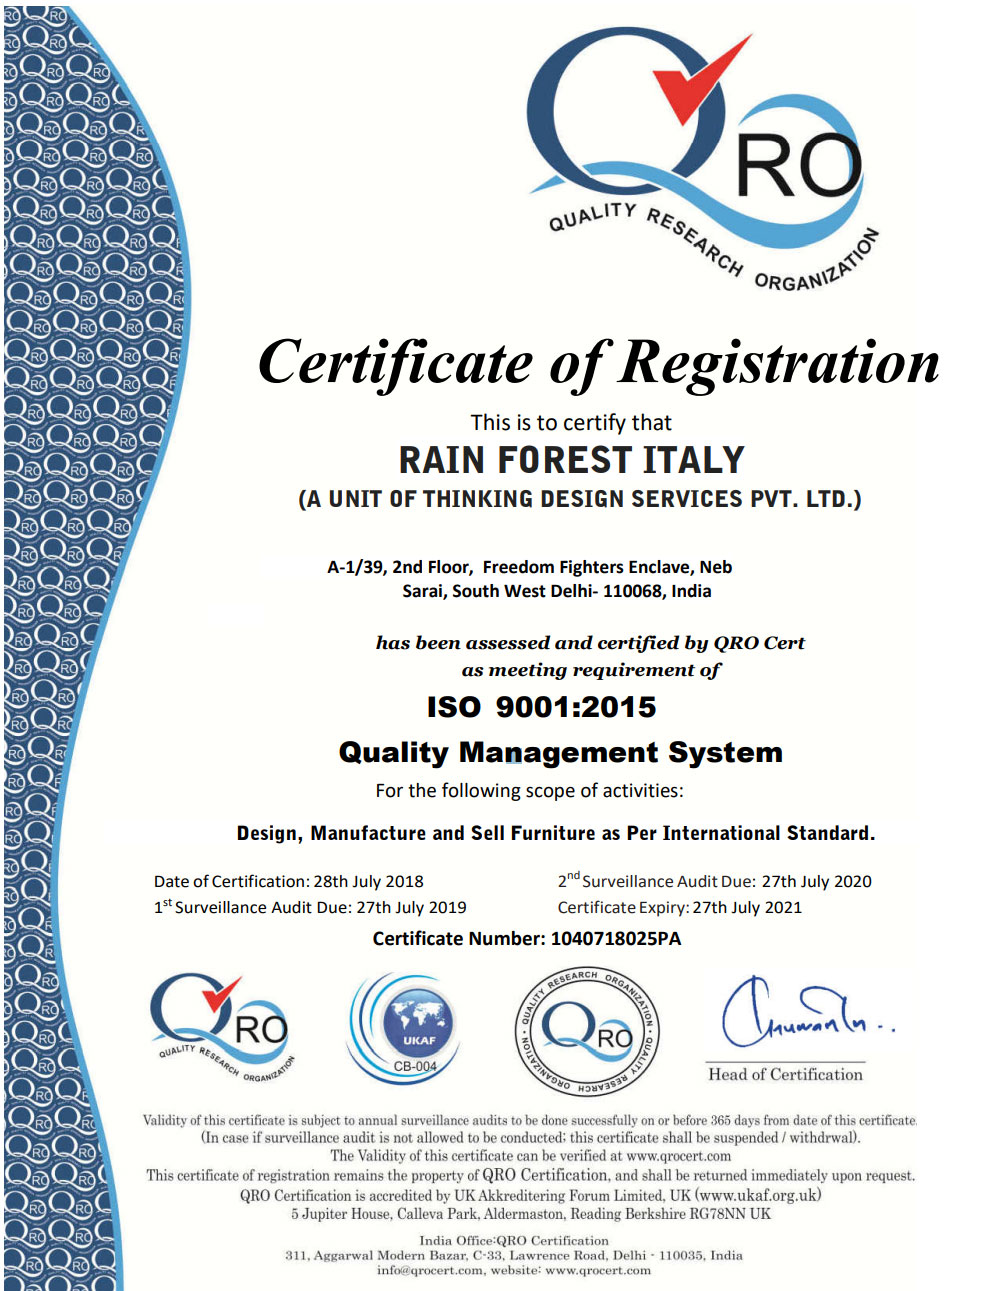 Rainforest Italy | ISO Certification fo Quality Management System